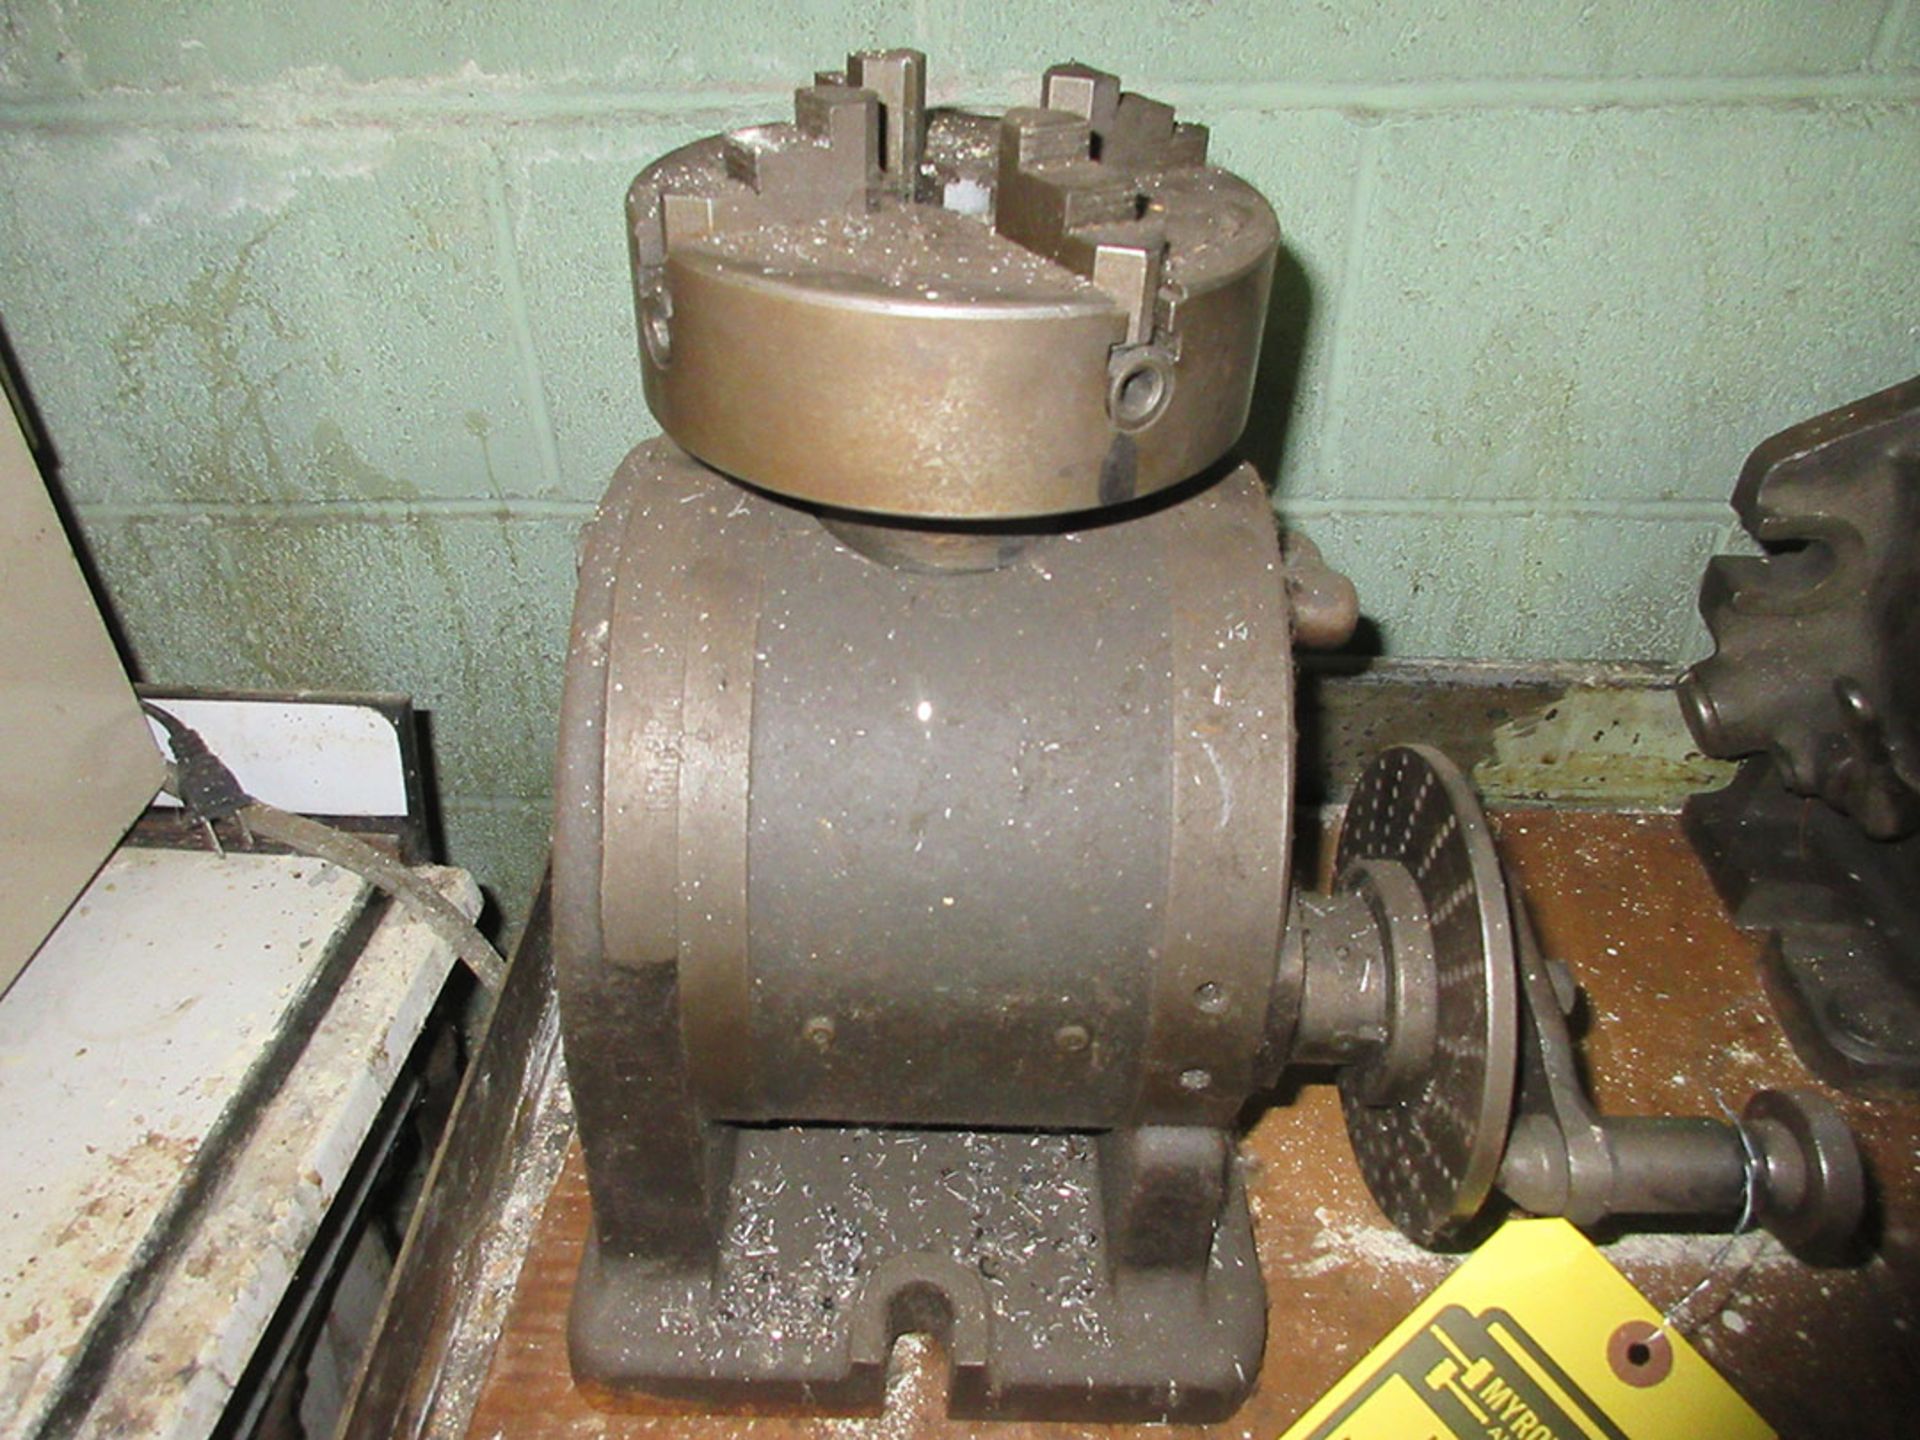 I-W CHUCK CO. INDEXER